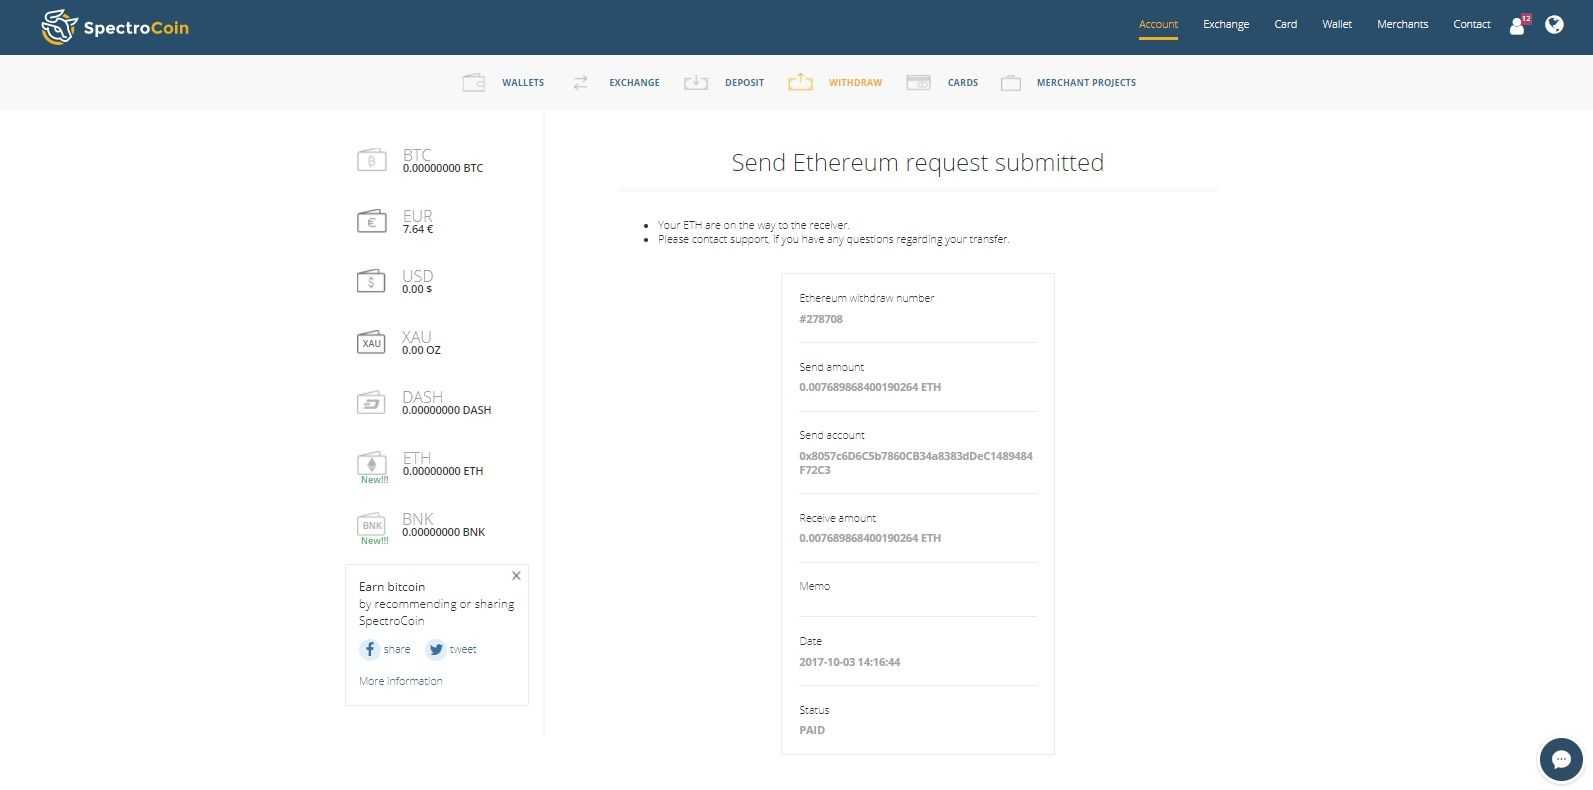 SpectroCoin "send Ethereum request was submitted" page